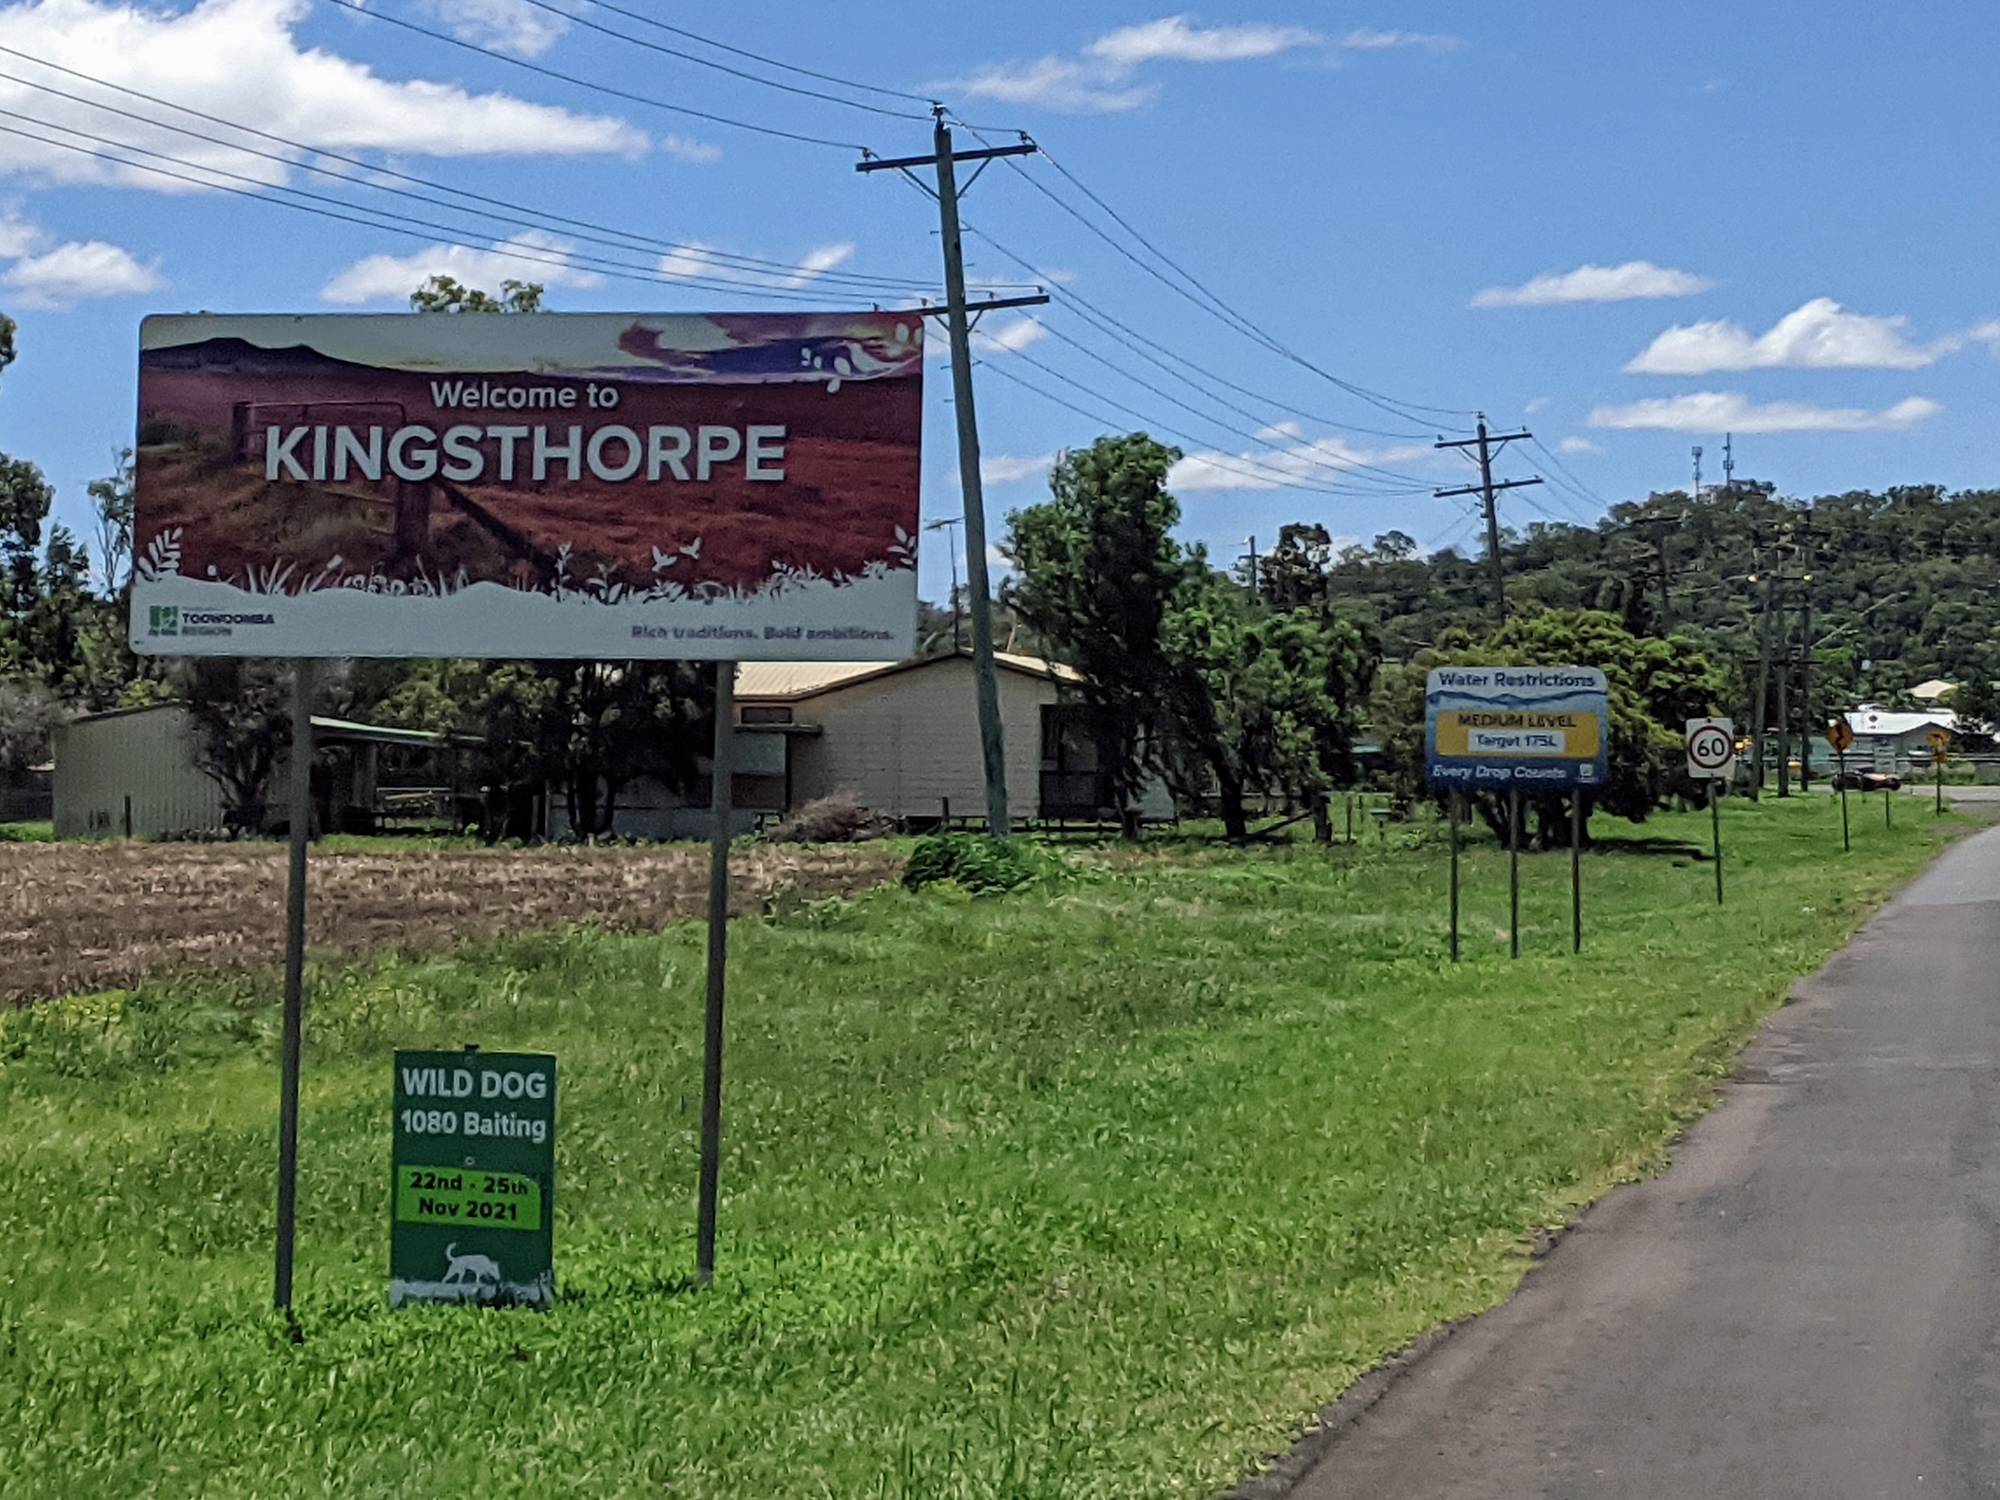 Before long we were in another tiny country town, this time, it was Kingsthorpe; smaller than Pittsworth but bigger than Mt Tyson!